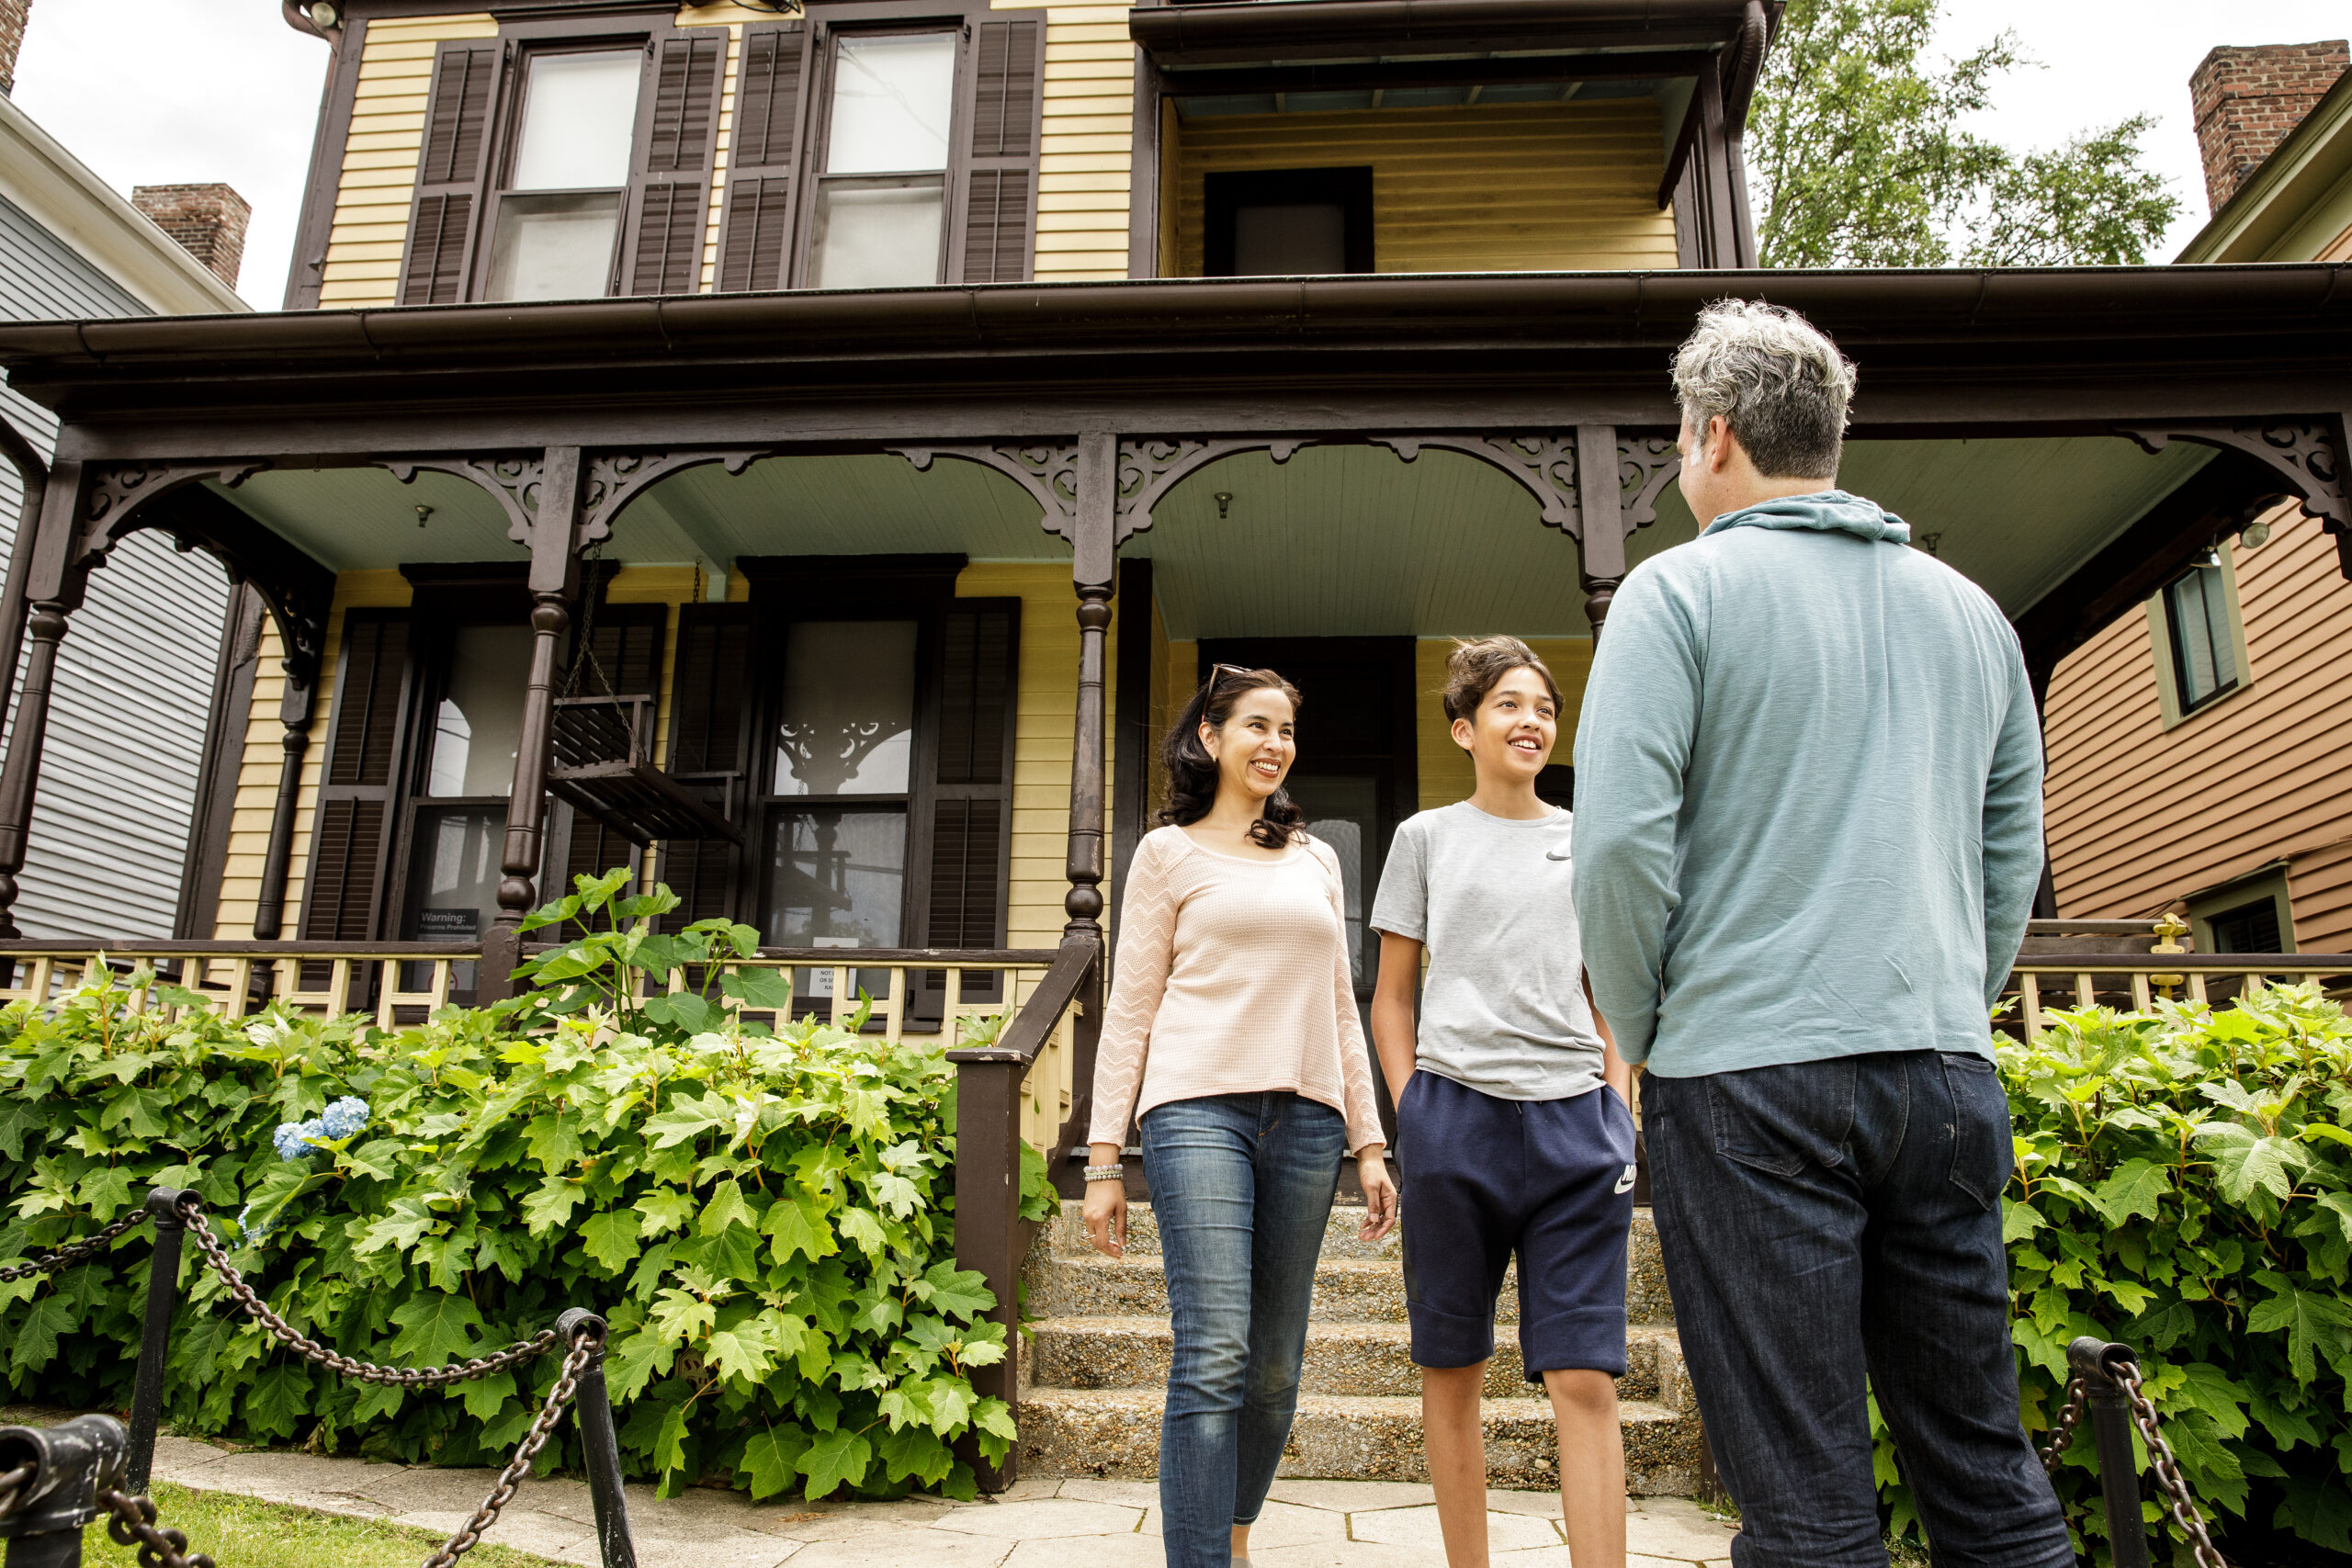 Three people standing in front of a house.